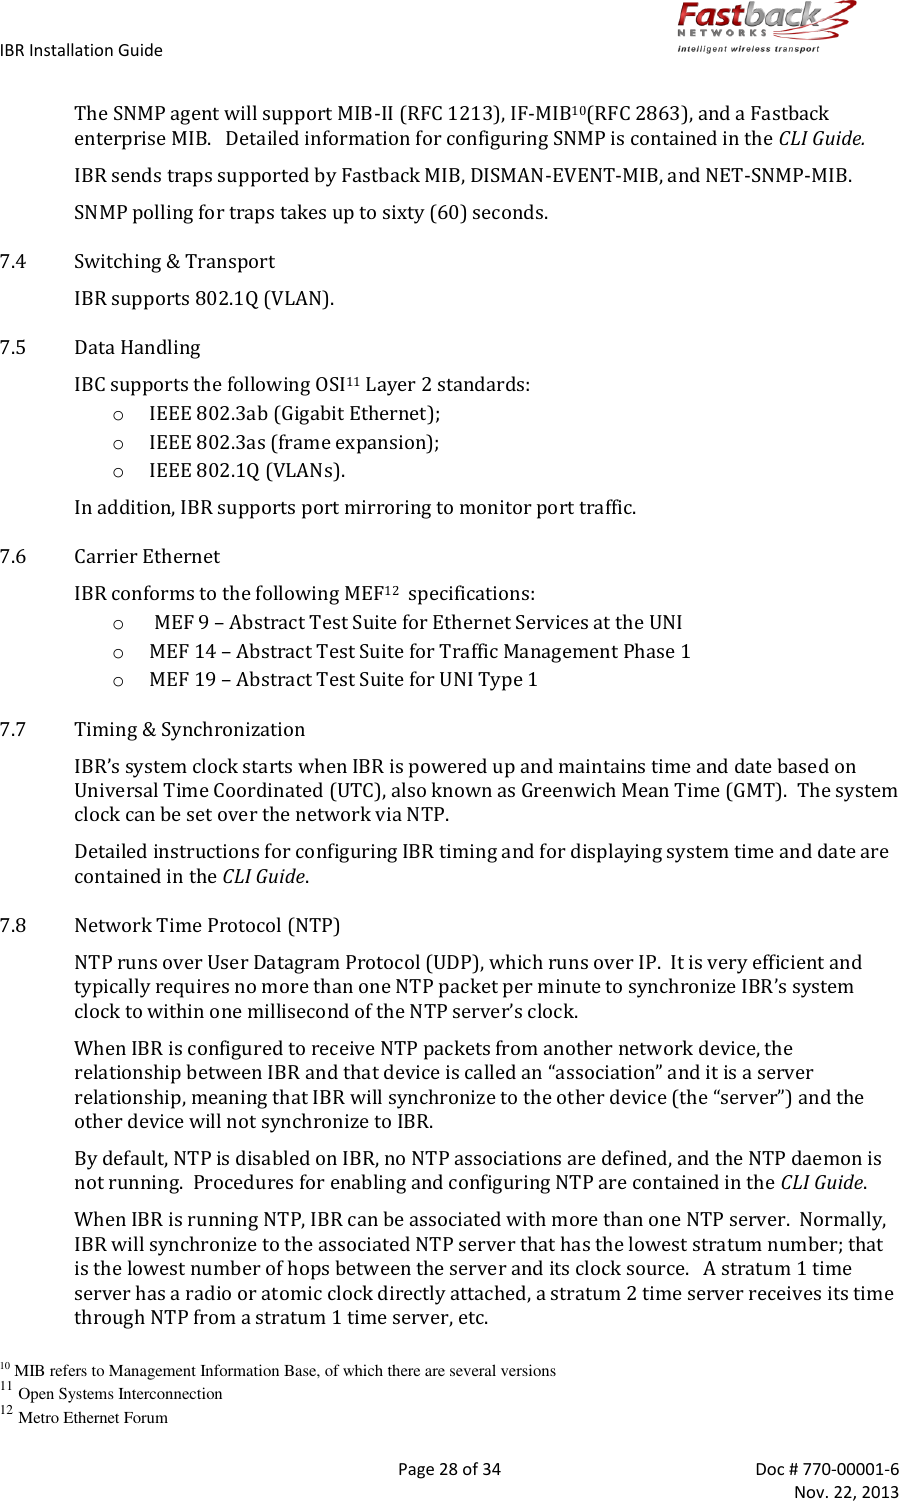 IBR Installation Guide        Page 28 of 34  Doc # 770-00001-6     Nov. 22, 2013   The SNMP agent will support MIB-II (RFC 1213), IF-MIB10(RFC 2863), and a Fastback enterprise MIB.   Detailed information for configuring SNMP is contained in the CLI Guide. IBR sends traps supported by Fastback MIB, DISMAN-EVENT-MIB, and NET-SNMP-MIB. SNMP polling for traps takes up to sixty (60) seconds. 7.4 Switching &amp; Transport IBR supports 802.1Q (VLAN). 7.5 Data Handling IBC supports the following OSI11 Layer 2 standards: o IEEE 802.3ab (Gigabit Ethernet); o IEEE 802.3as (frame expansion); o IEEE 802.1Q (VLANs). In addition, IBR supports port mirroring to monitor port traffic. 7.6 Carrier Ethernet IBR conforms to the following MEF12  specifications: o  MEF 9 – Abstract Test Suite for Ethernet Services at the UNI o MEF 14 – Abstract Test Suite for Traffic Management Phase 1 o MEF 19 – Abstract Test Suite for UNI Type 1 7.7 Timing &amp; Synchronization IBR’s system clock starts when IBR is powered up and maintains time and date based on Universal Time Coordinated (UTC), also known as Greenwich Mean Time (GMT).  The system clock can be set over the network via NTP. Detailed instructions for configuring IBR timing and for displaying system time and date are contained in the CLI Guide. 7.8 Network Time Protocol (NTP) NTP runs over User Datagram Protocol (UDP), which runs over IP.  It is very efficient and typically requires no more than one NTP packet per minute to synchronize IBR’s system clock to within one millisecond of the NTP server’s clock. When IBR is configured to receive NTP packets from another network device, the relationship between IBR and that device is called an “association” and it is a server relationship, meaning that IBR will synchronize to the other device (the “server”) and the other device will not synchronize to IBR.  By default, NTP is disabled on IBR, no NTP associations are defined, and the NTP daemon is not running.  Procedures for enabling and configuring NTP are contained in the CLI Guide. When IBR is running NTP, IBR can be associated with more than one NTP server.  Normally, IBR will synchronize to the associated NTP server that has the lowest stratum number; that is the lowest number of hops between the server and its clock source.   A stratum 1 time server has a radio or atomic clock directly attached, a stratum 2 time server receives its time through NTP from a stratum 1 time server, etc.  10 MIB refers to Management Information Base, of which there are several versions 11 Open Systems Interconnection 12 Metro Ethernet Forum 